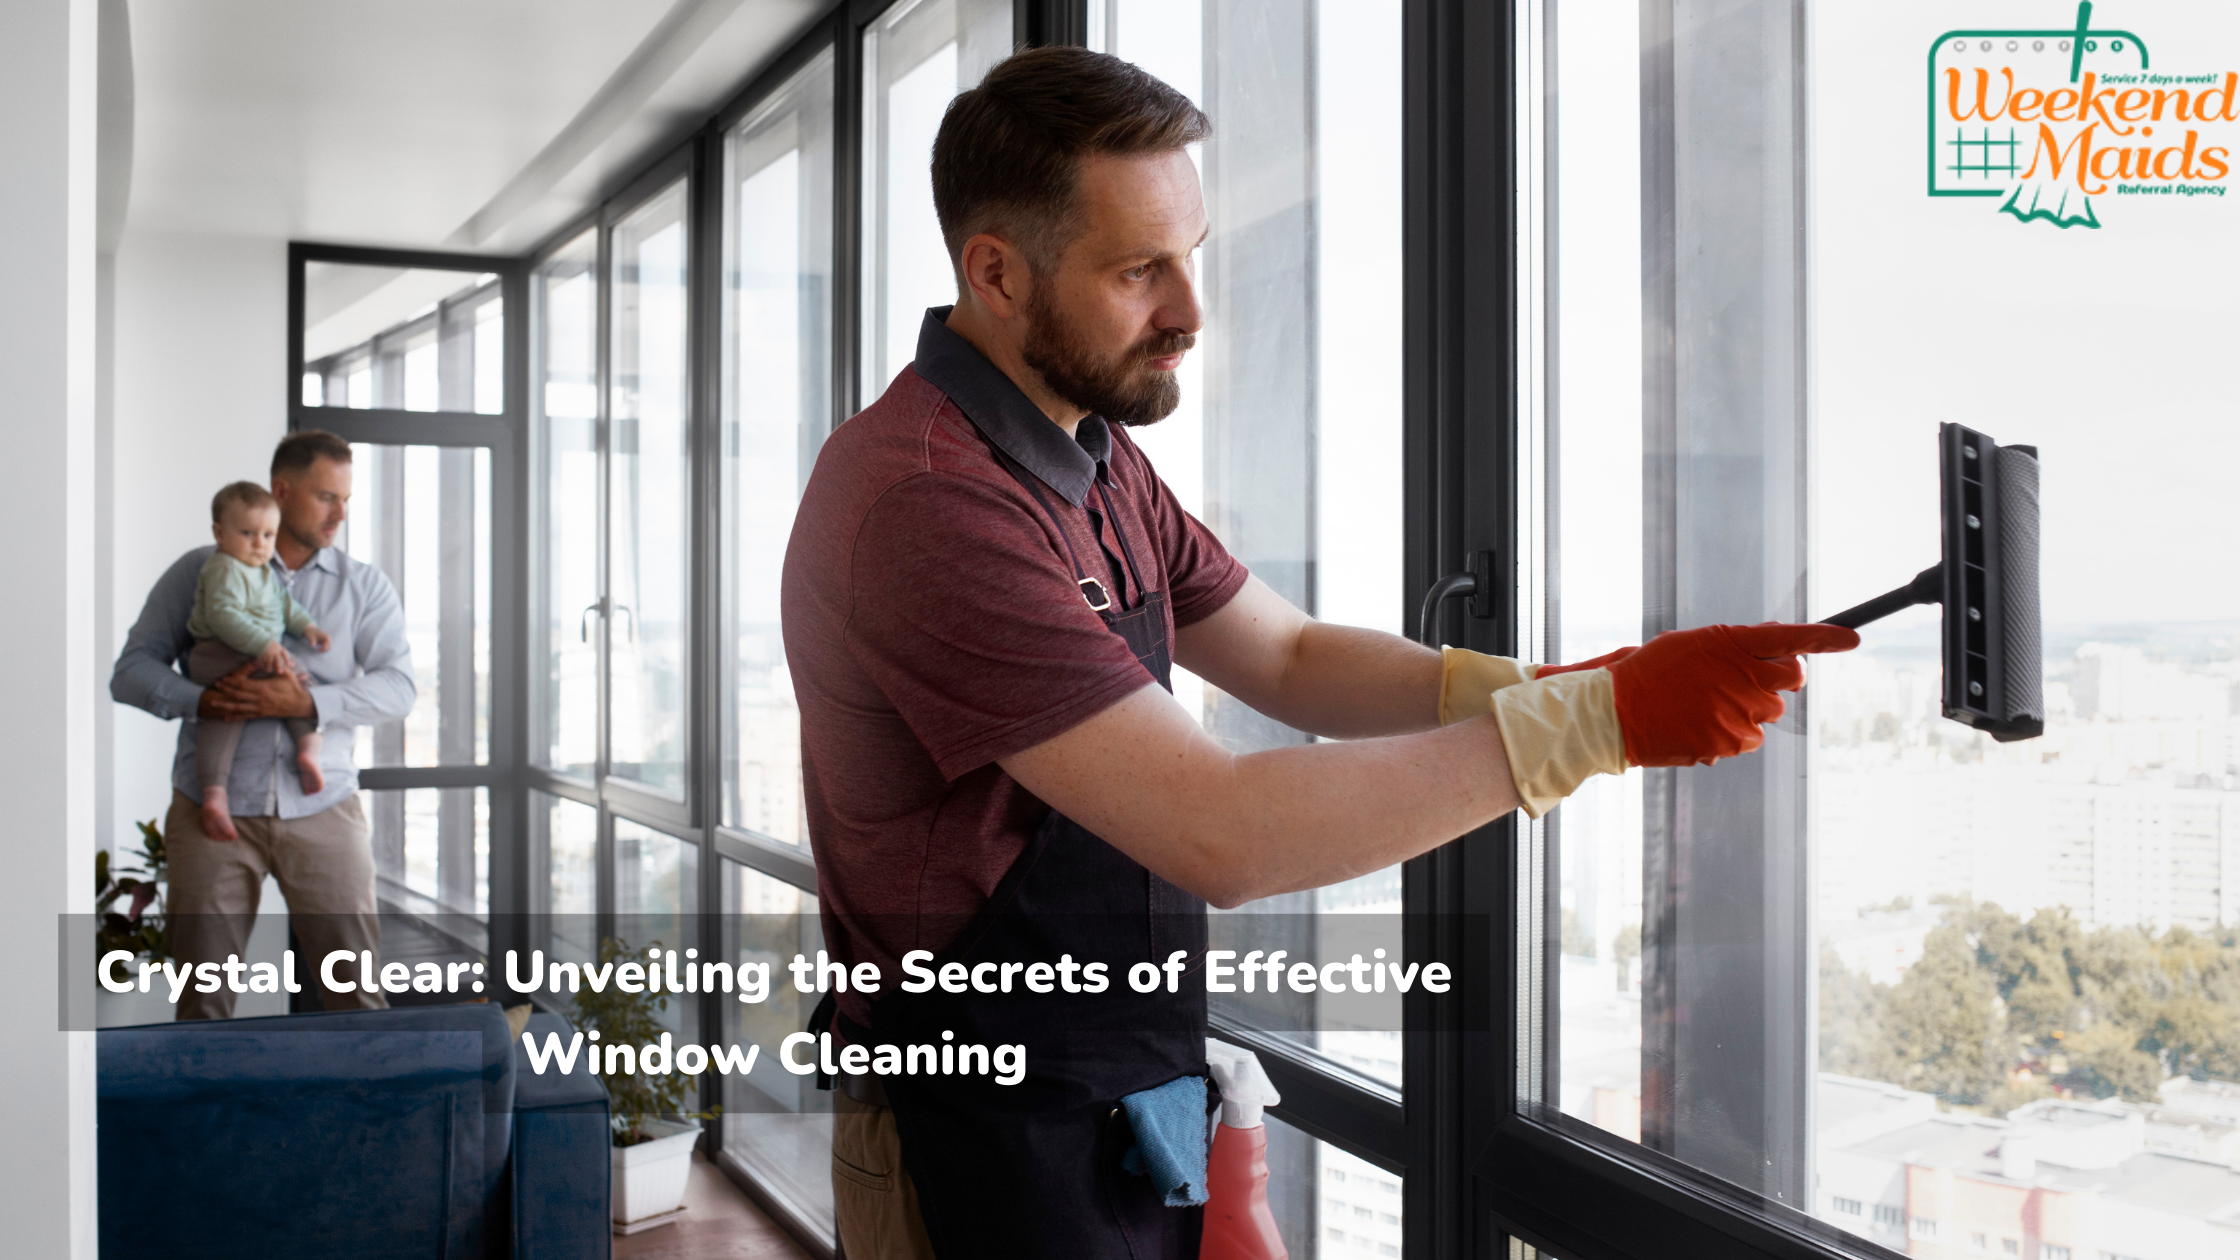 Window Cleaning: Achieving Crystal Clear Results